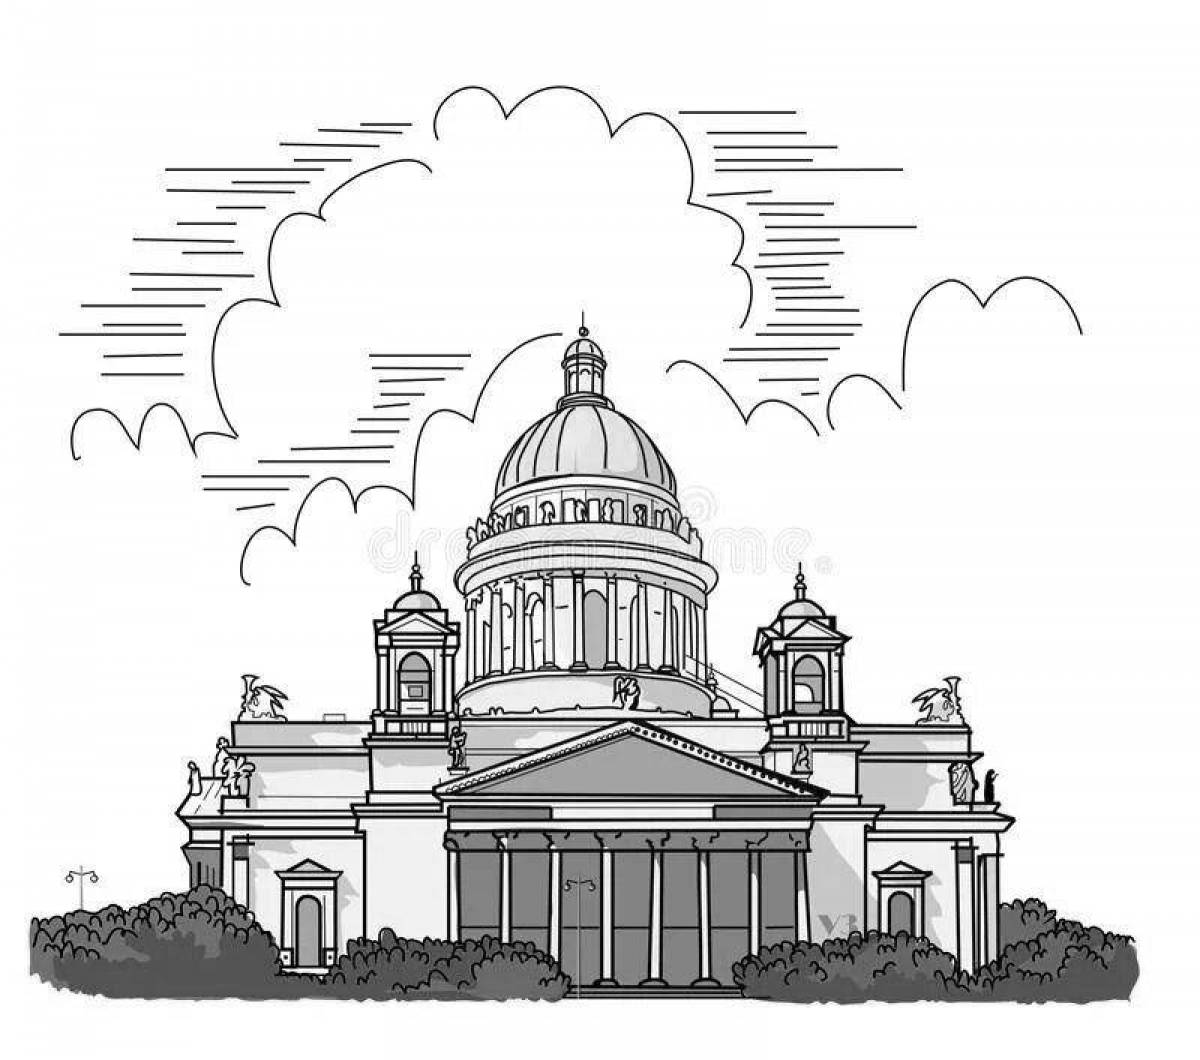 Coloring page of the grandiose St. Isaac's Cathedral